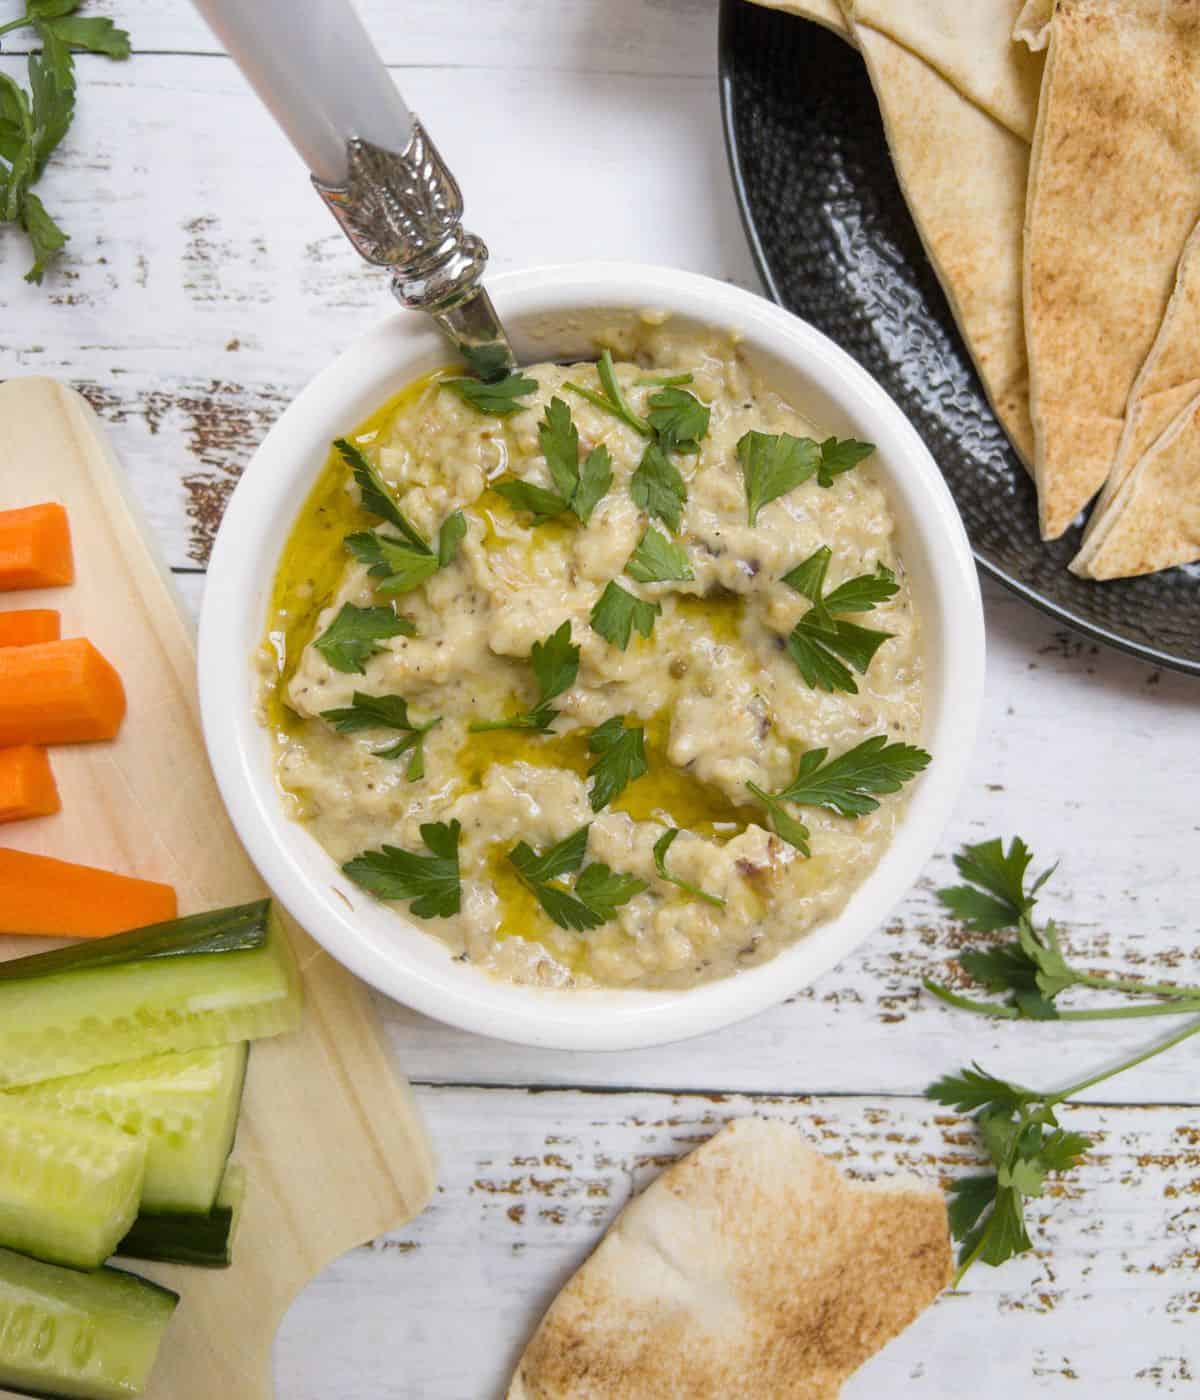 a small white bowl filled with baba ganoush with some flatbread and crudities on the side.